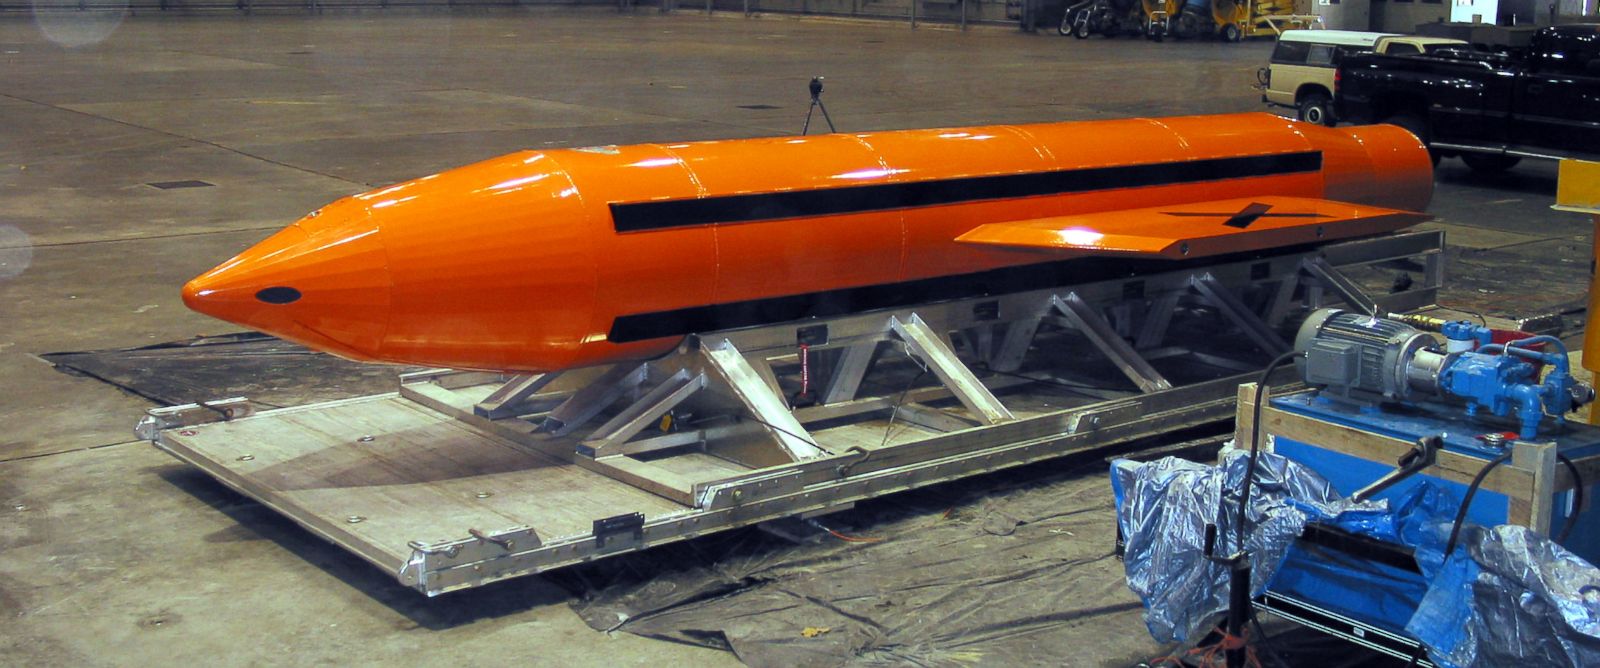 PHOTO: A Massive Ordnance Air Blast (MOAB) weapon is prepared for testing atthe Eglin Air Force Armament Center, on March 11, 2003.